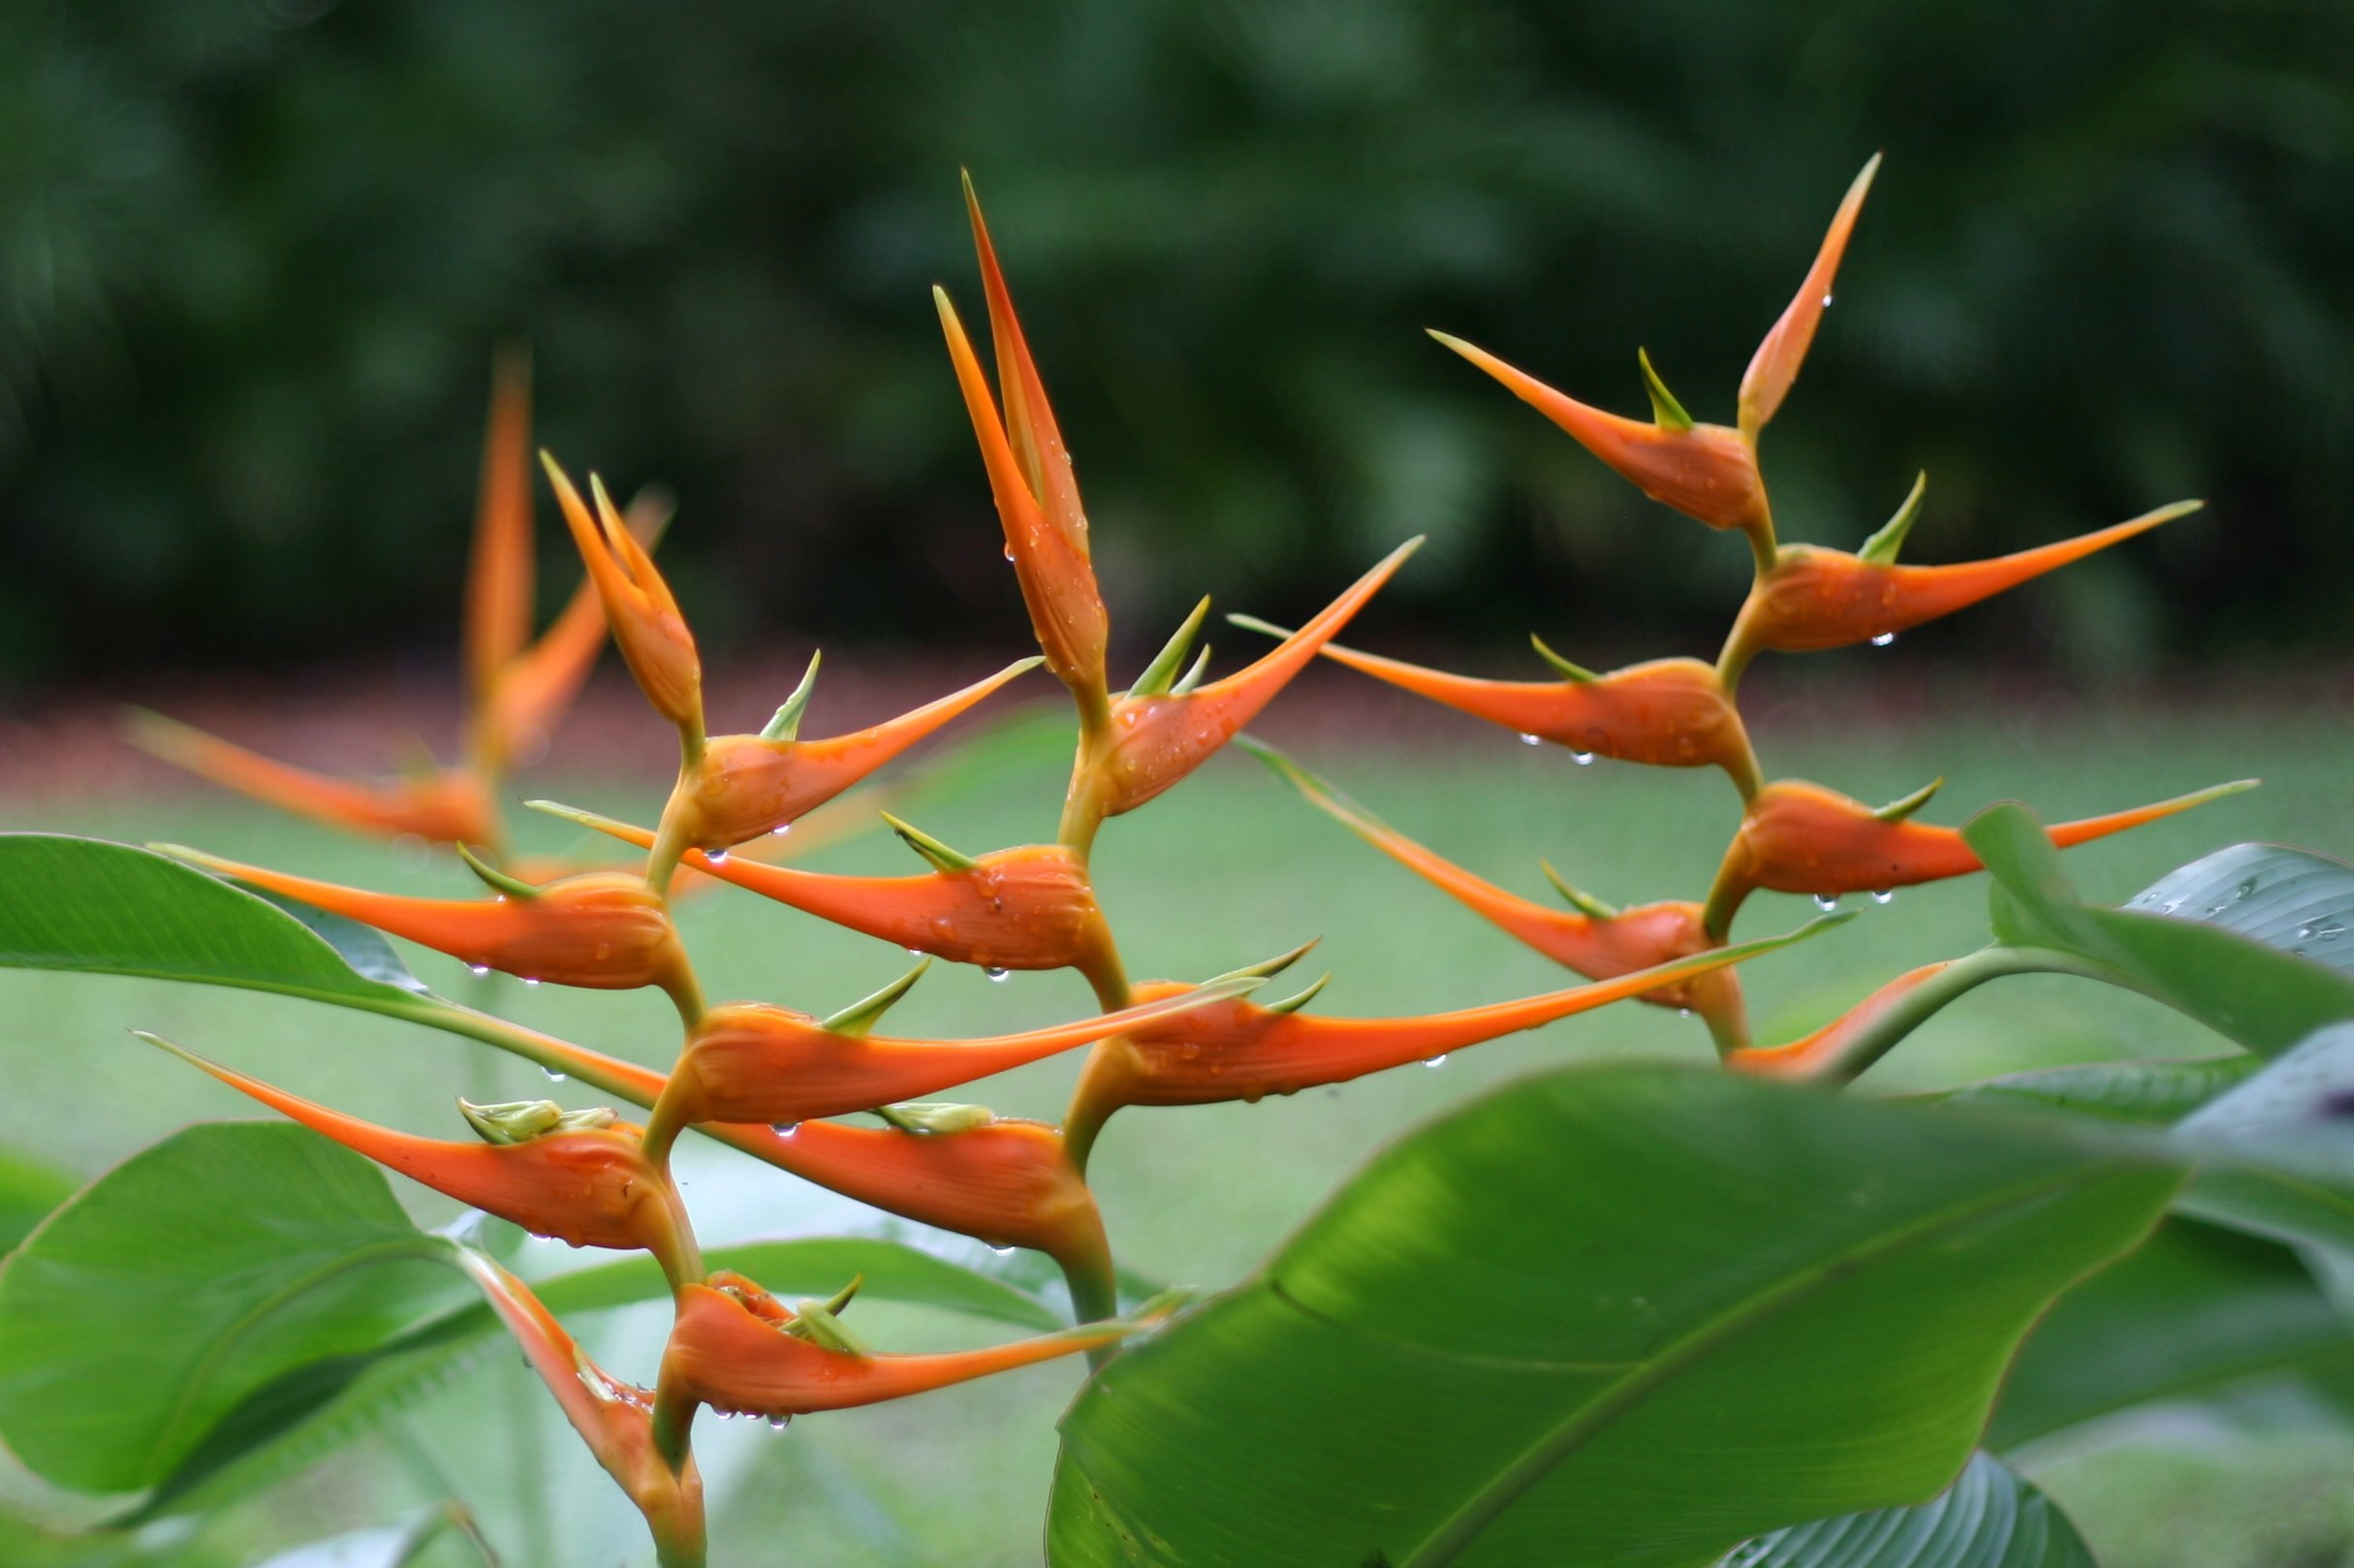 Is the Heliconia flower native to the Amazon rainforest?